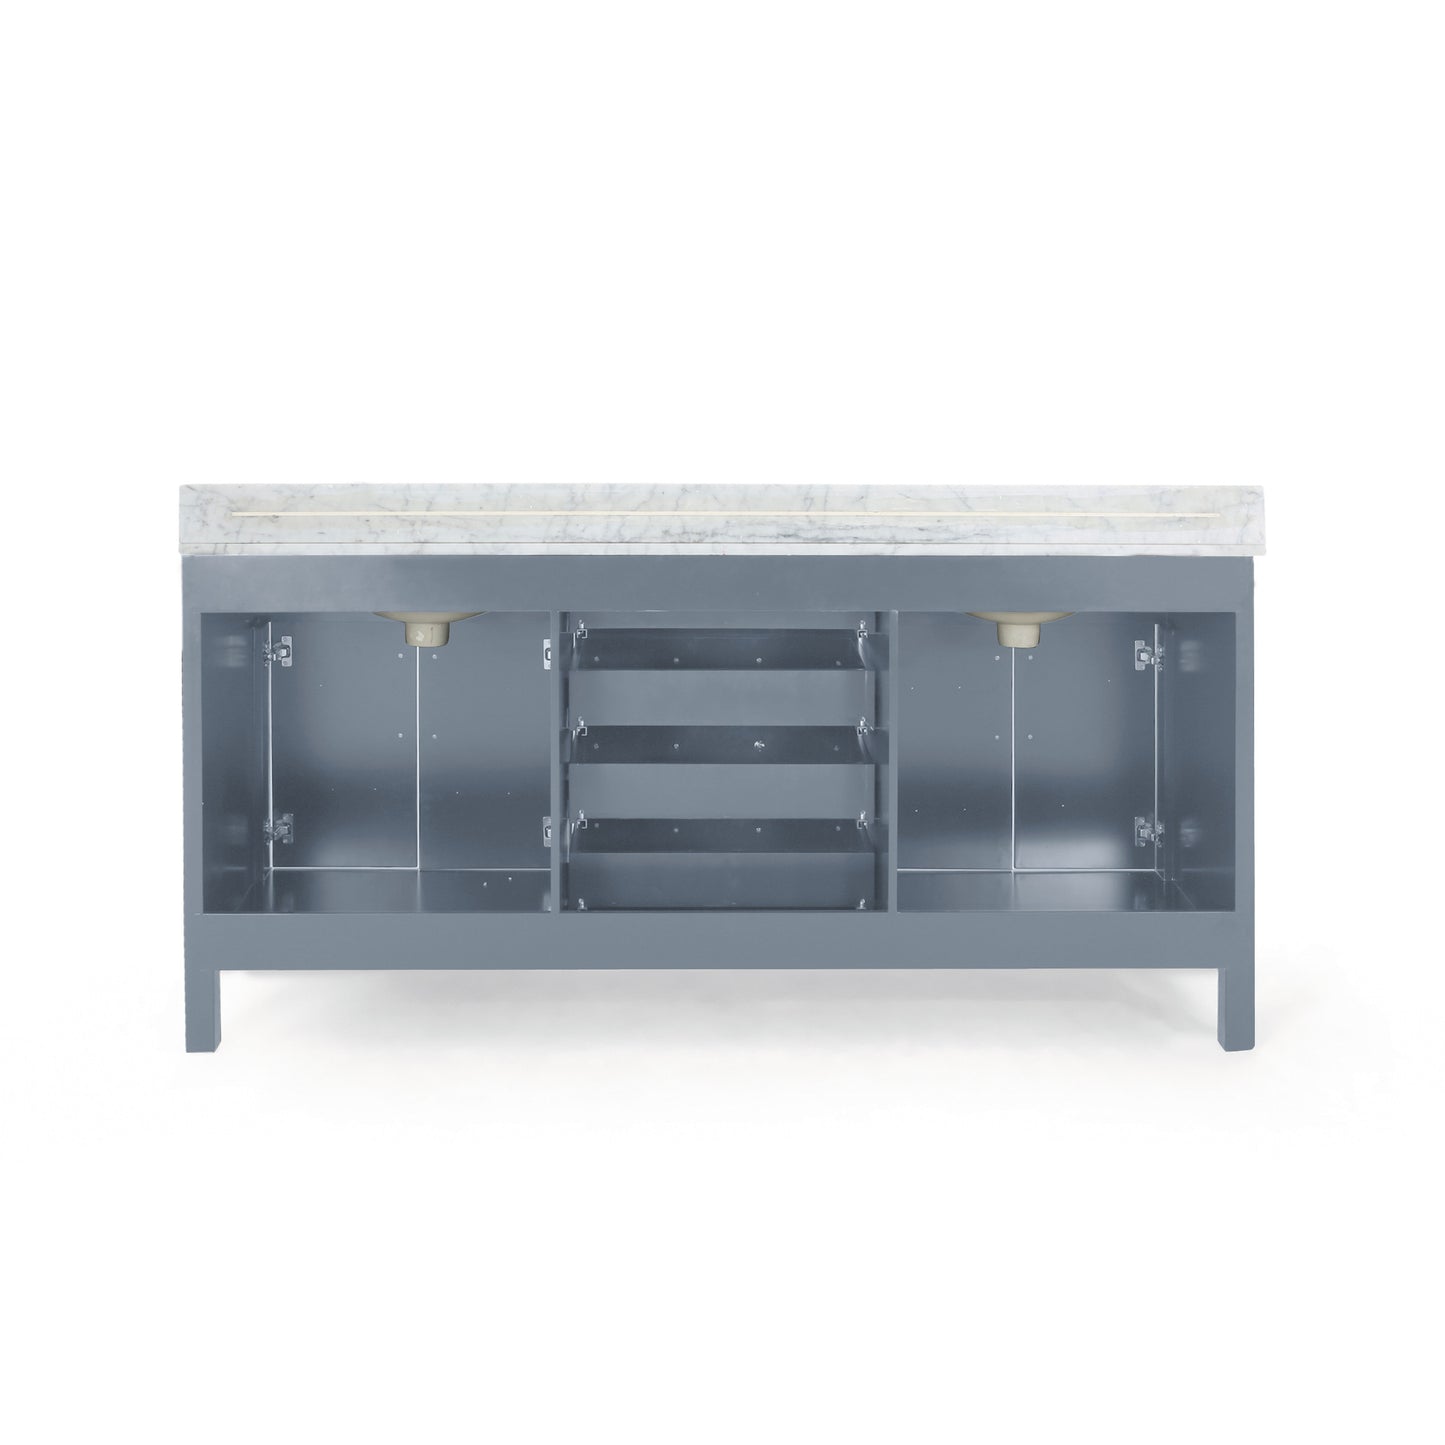 Greeley Contemporary 72" Wood Double Sink Bathroom Vanity with Marble Counter Top with Carrara White Marble